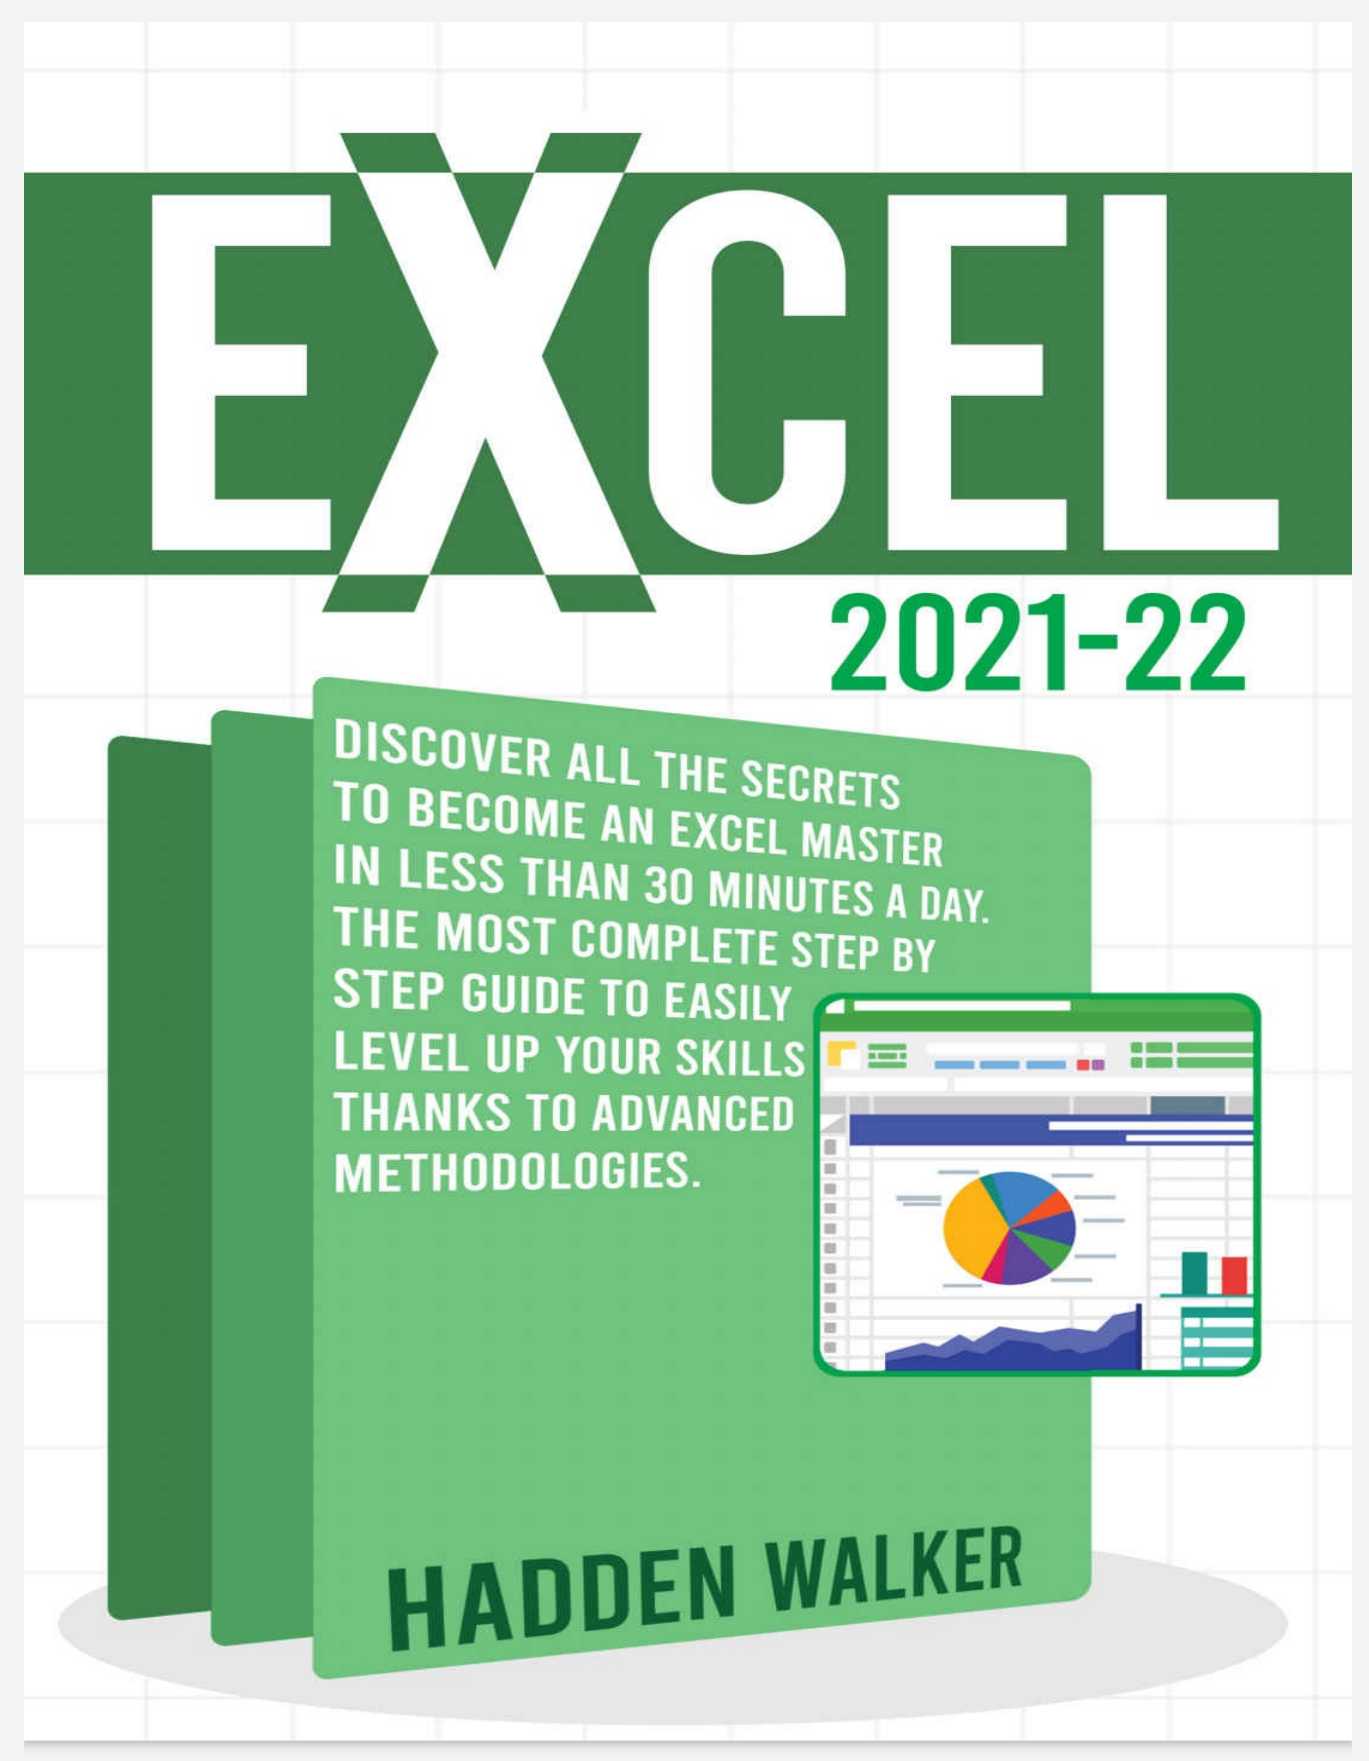 Excel 2021-22: Discover All The Secrets To Become An Excel Master in Less Than 30 Minutes a Day